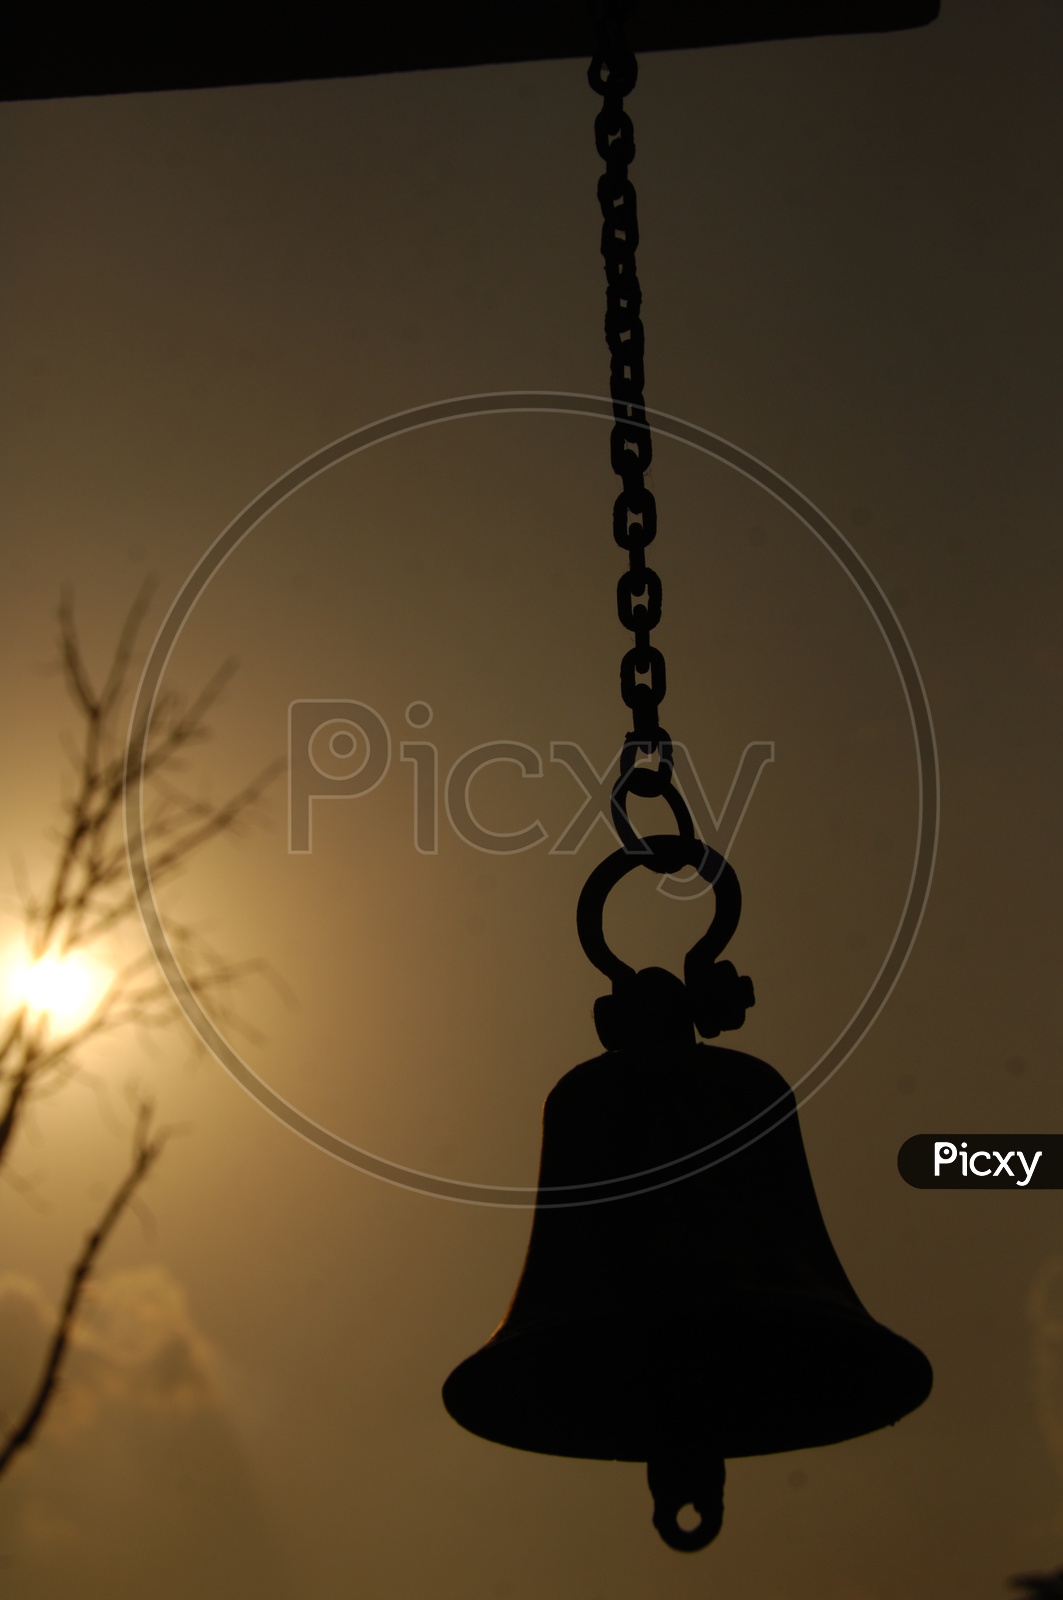 A hanging bell and a Sun in the background